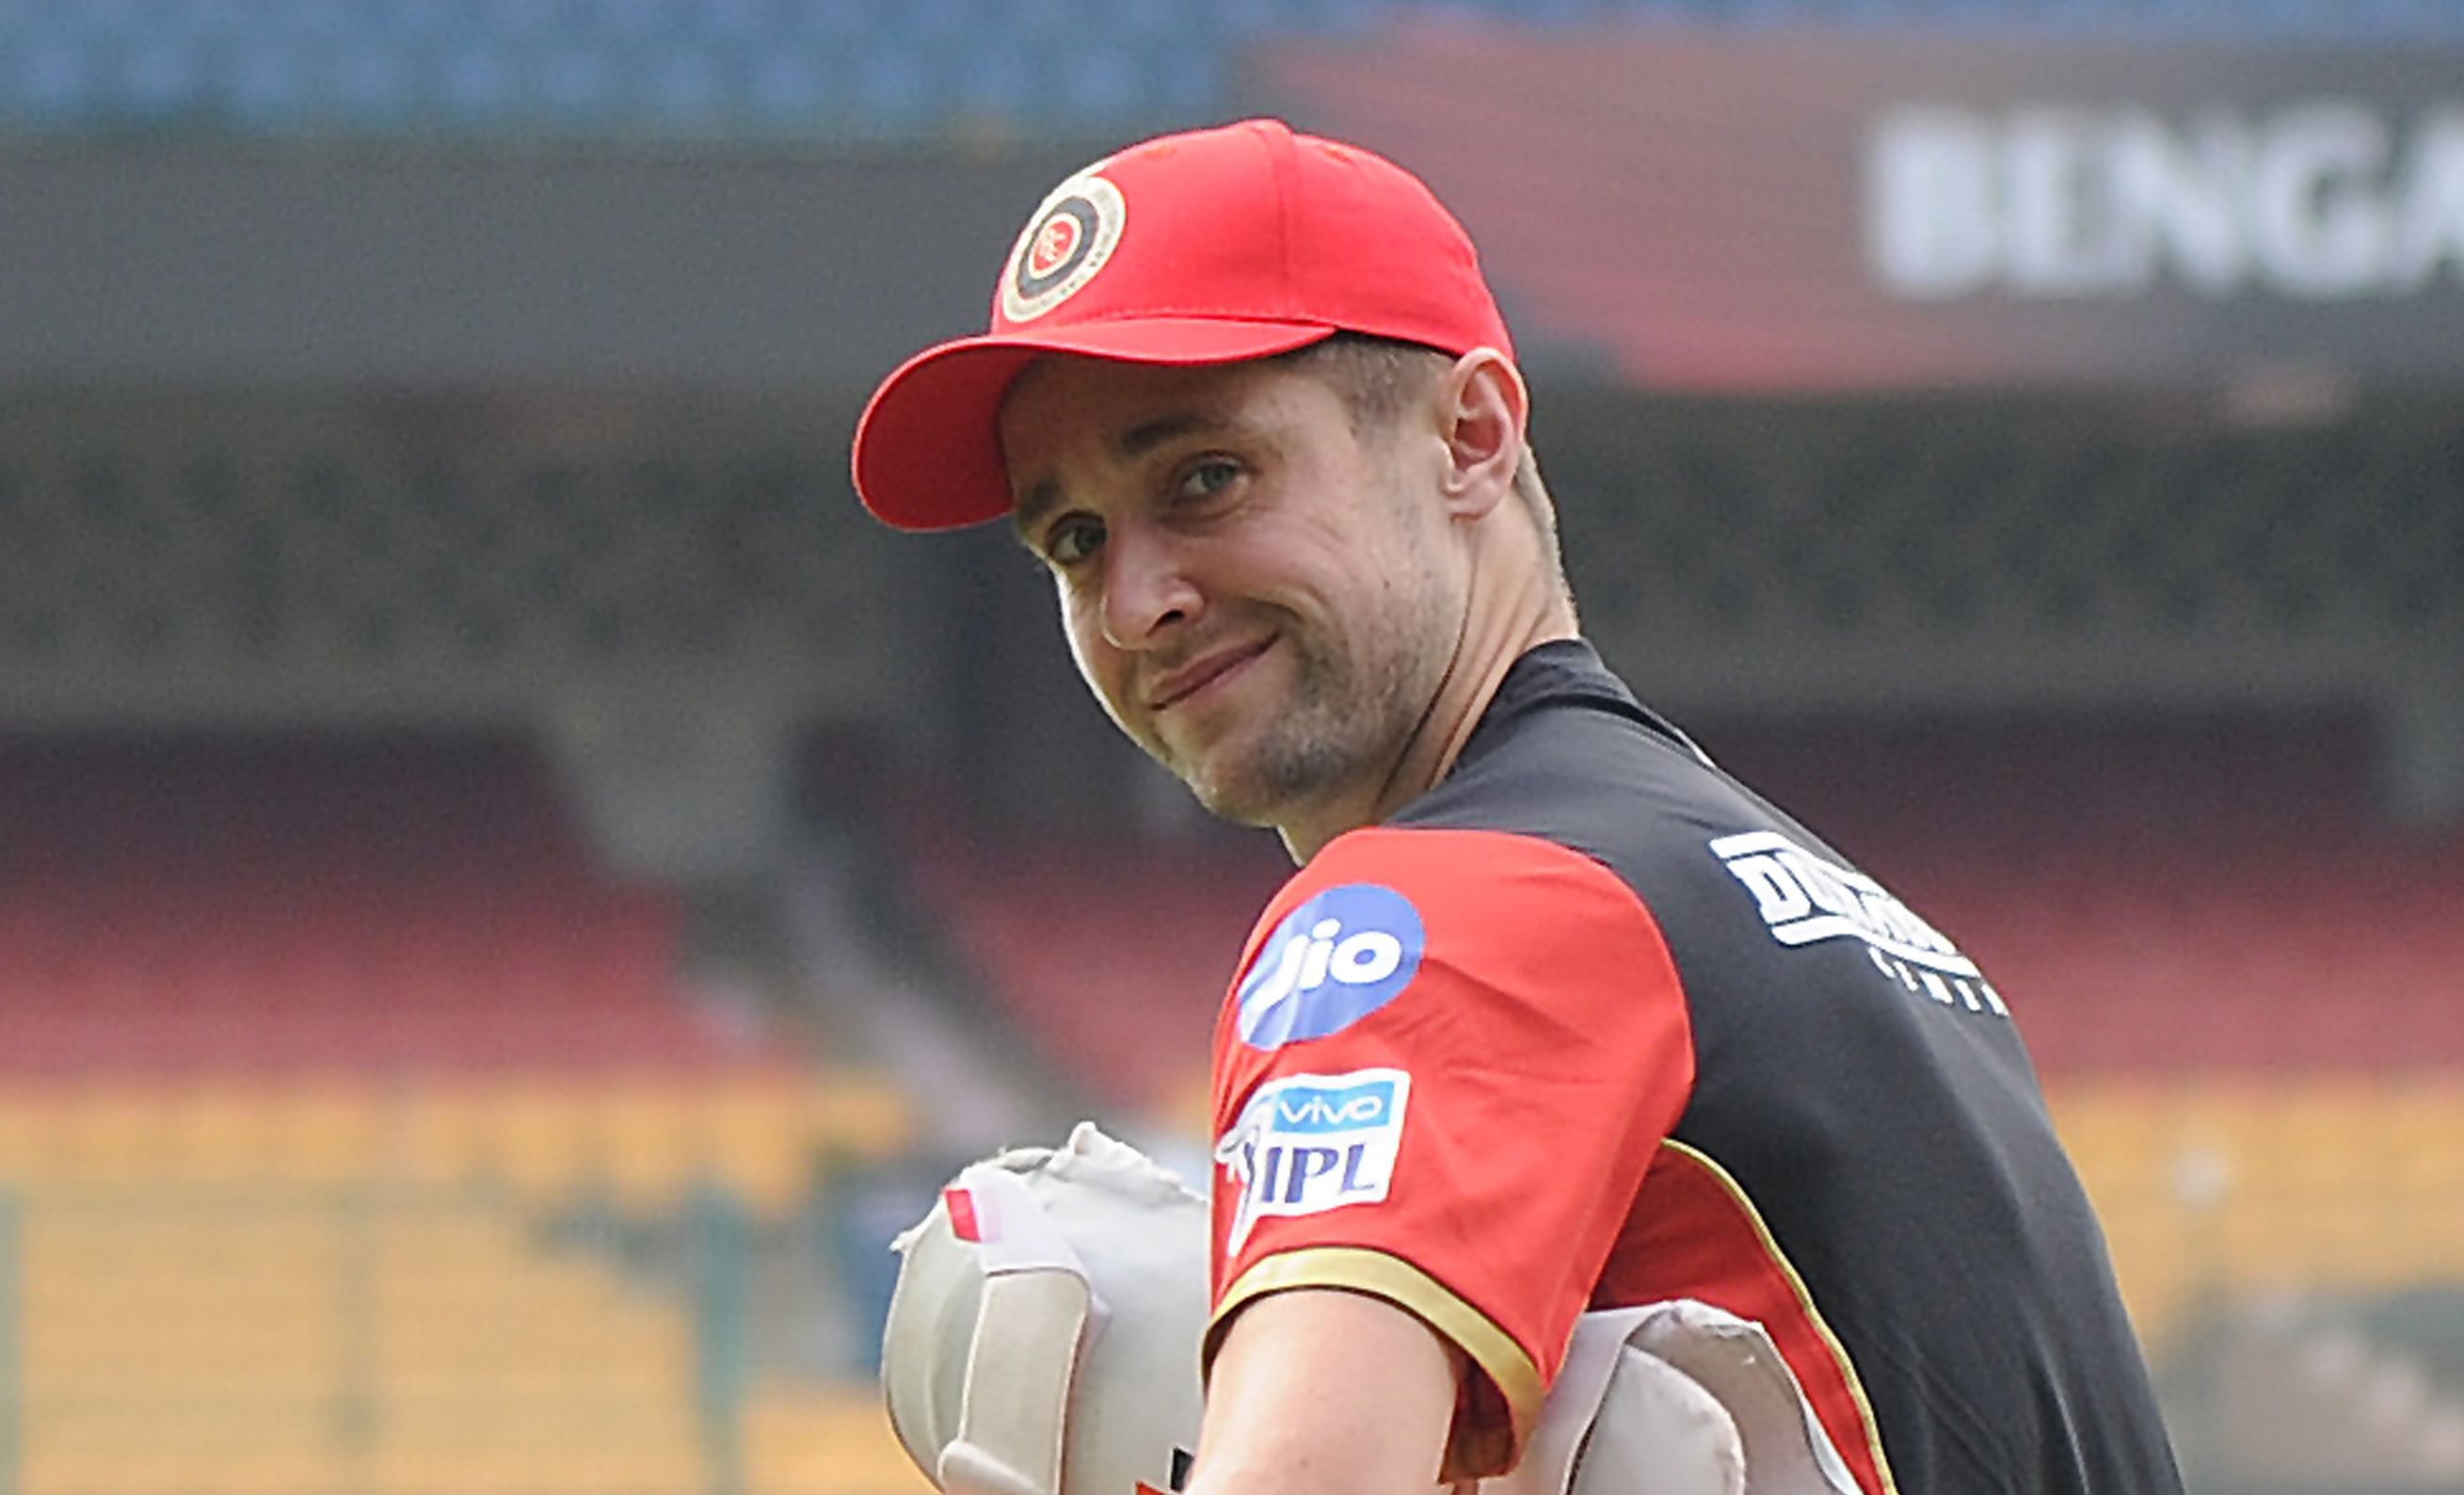 Paceman Chris Woakes agrees RCB need to quickly improve their death bowling. DH Photo/ Srikanta Sharma R